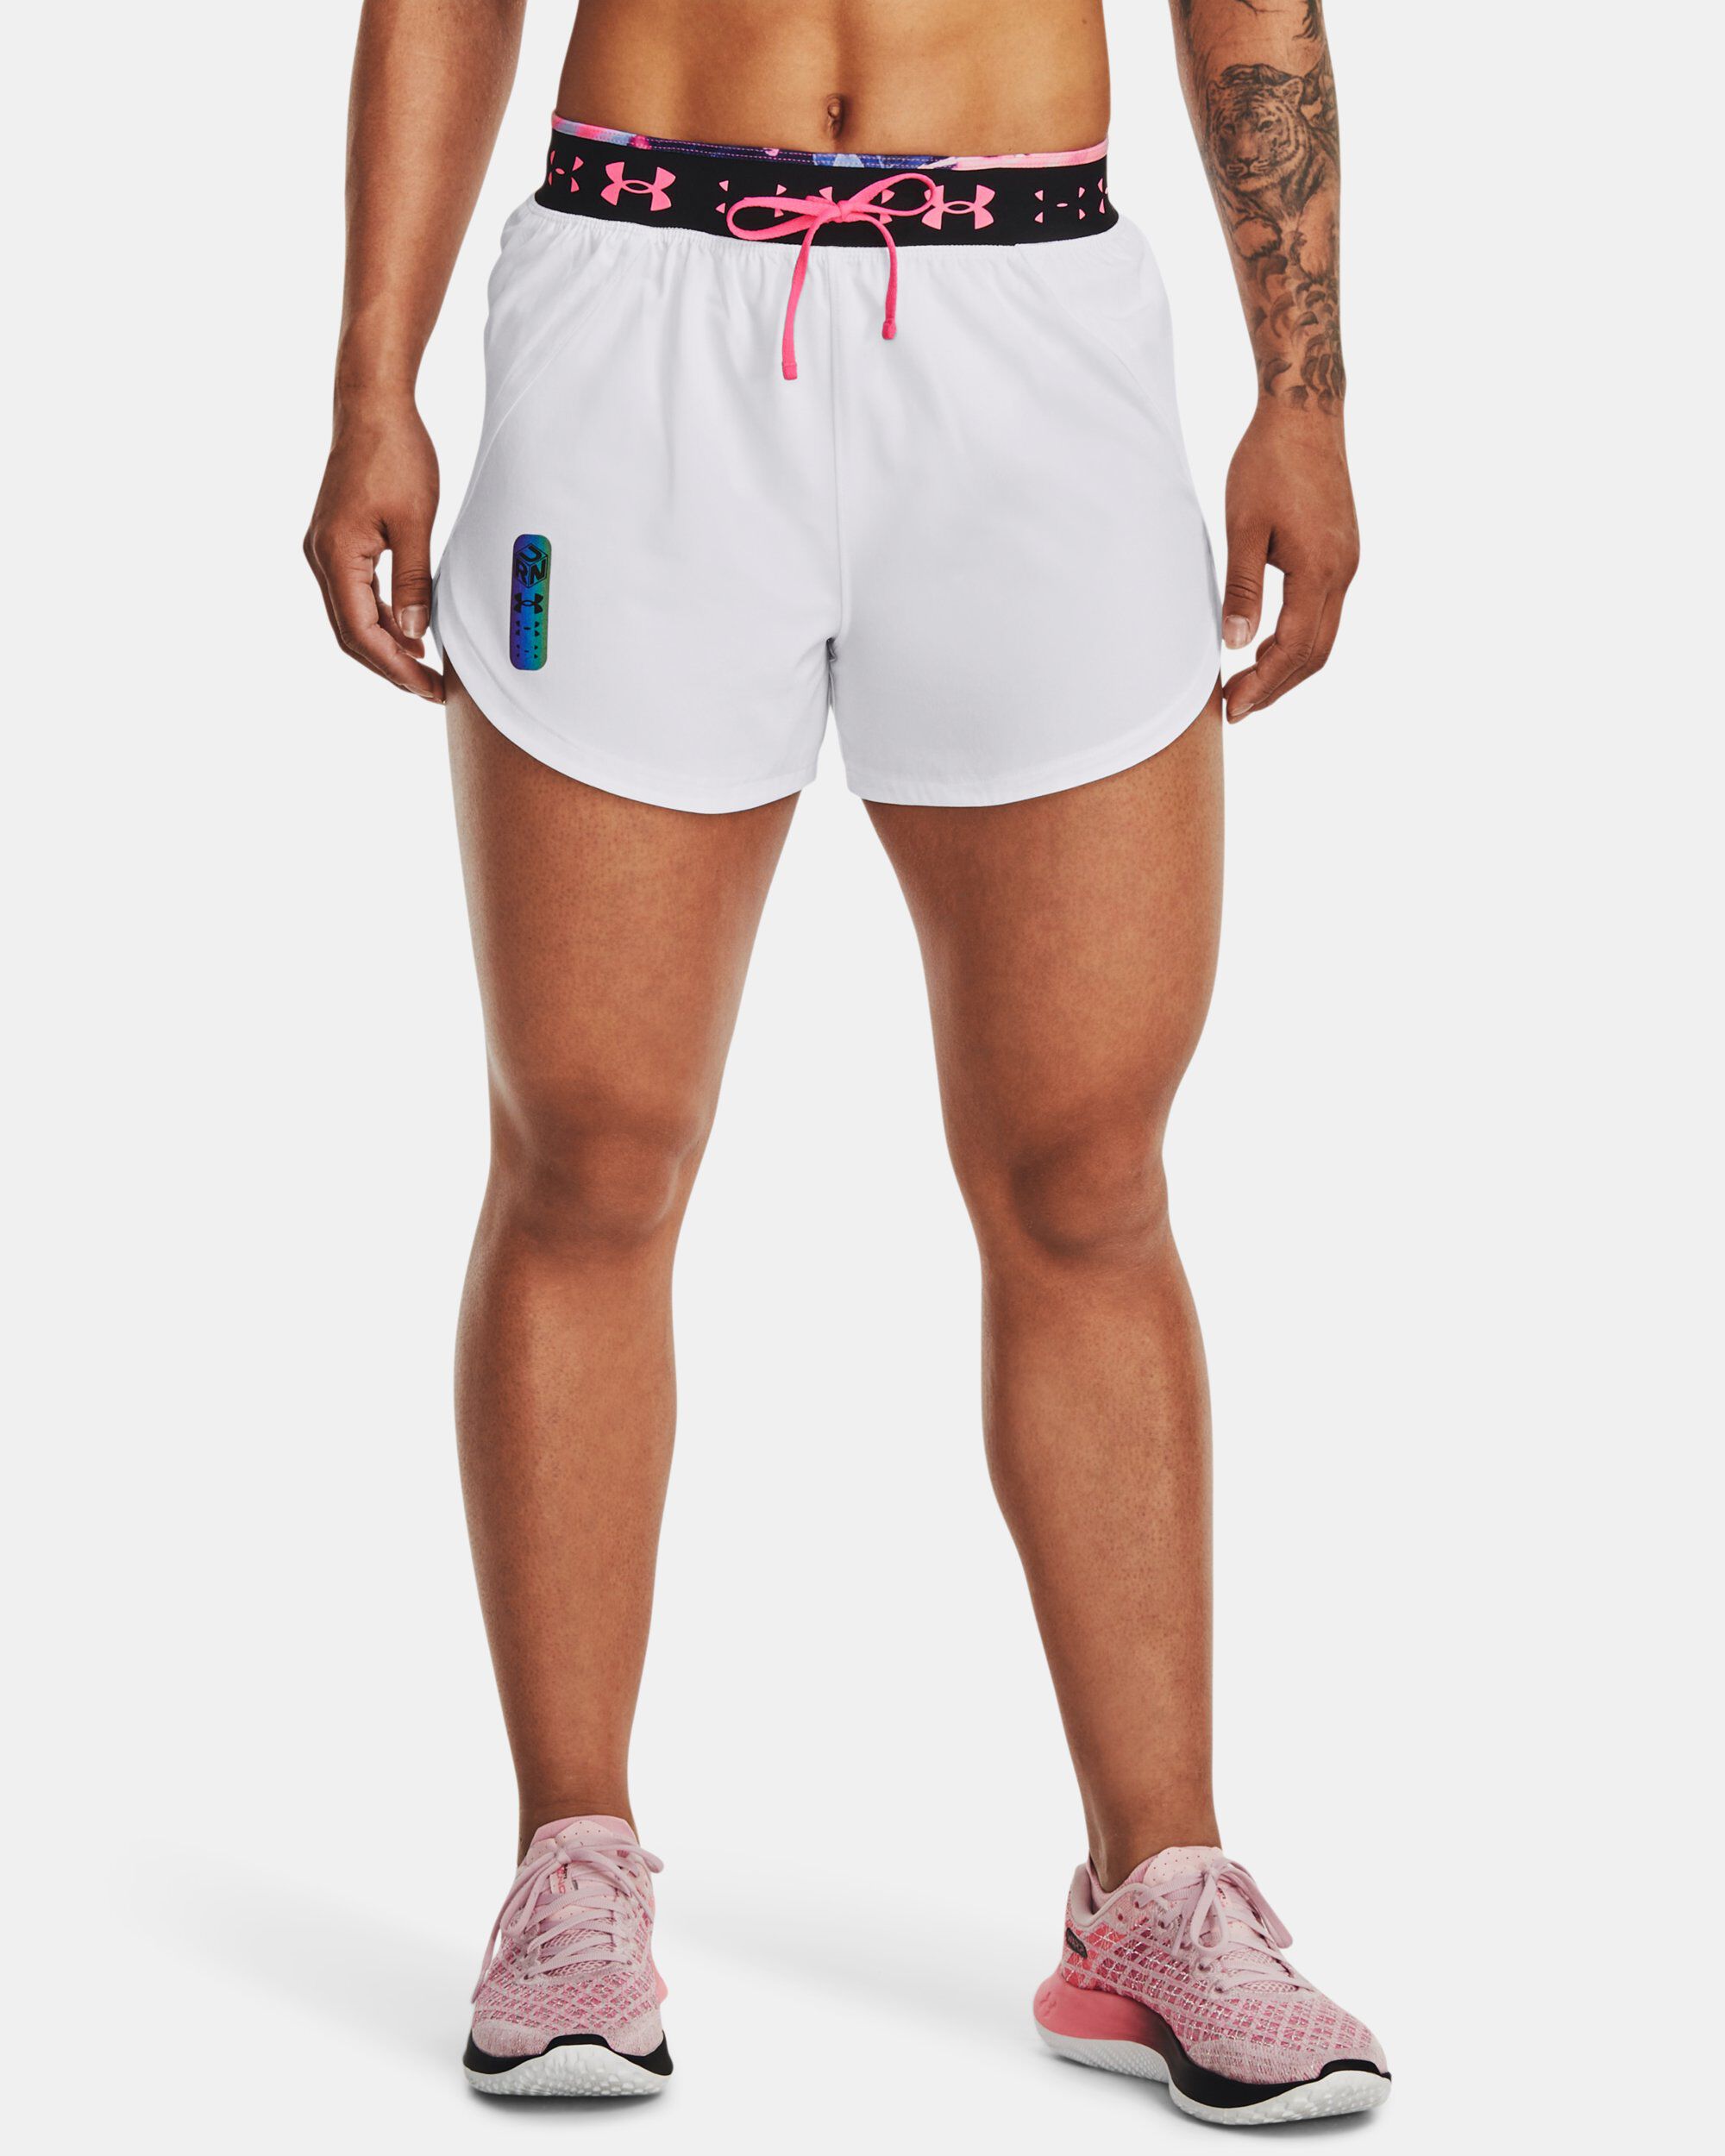 Offer Price S$ 34.02: Women's high-waisted running shorts - Connected to  India News I Singapore l UAE l UK l USA l NRI